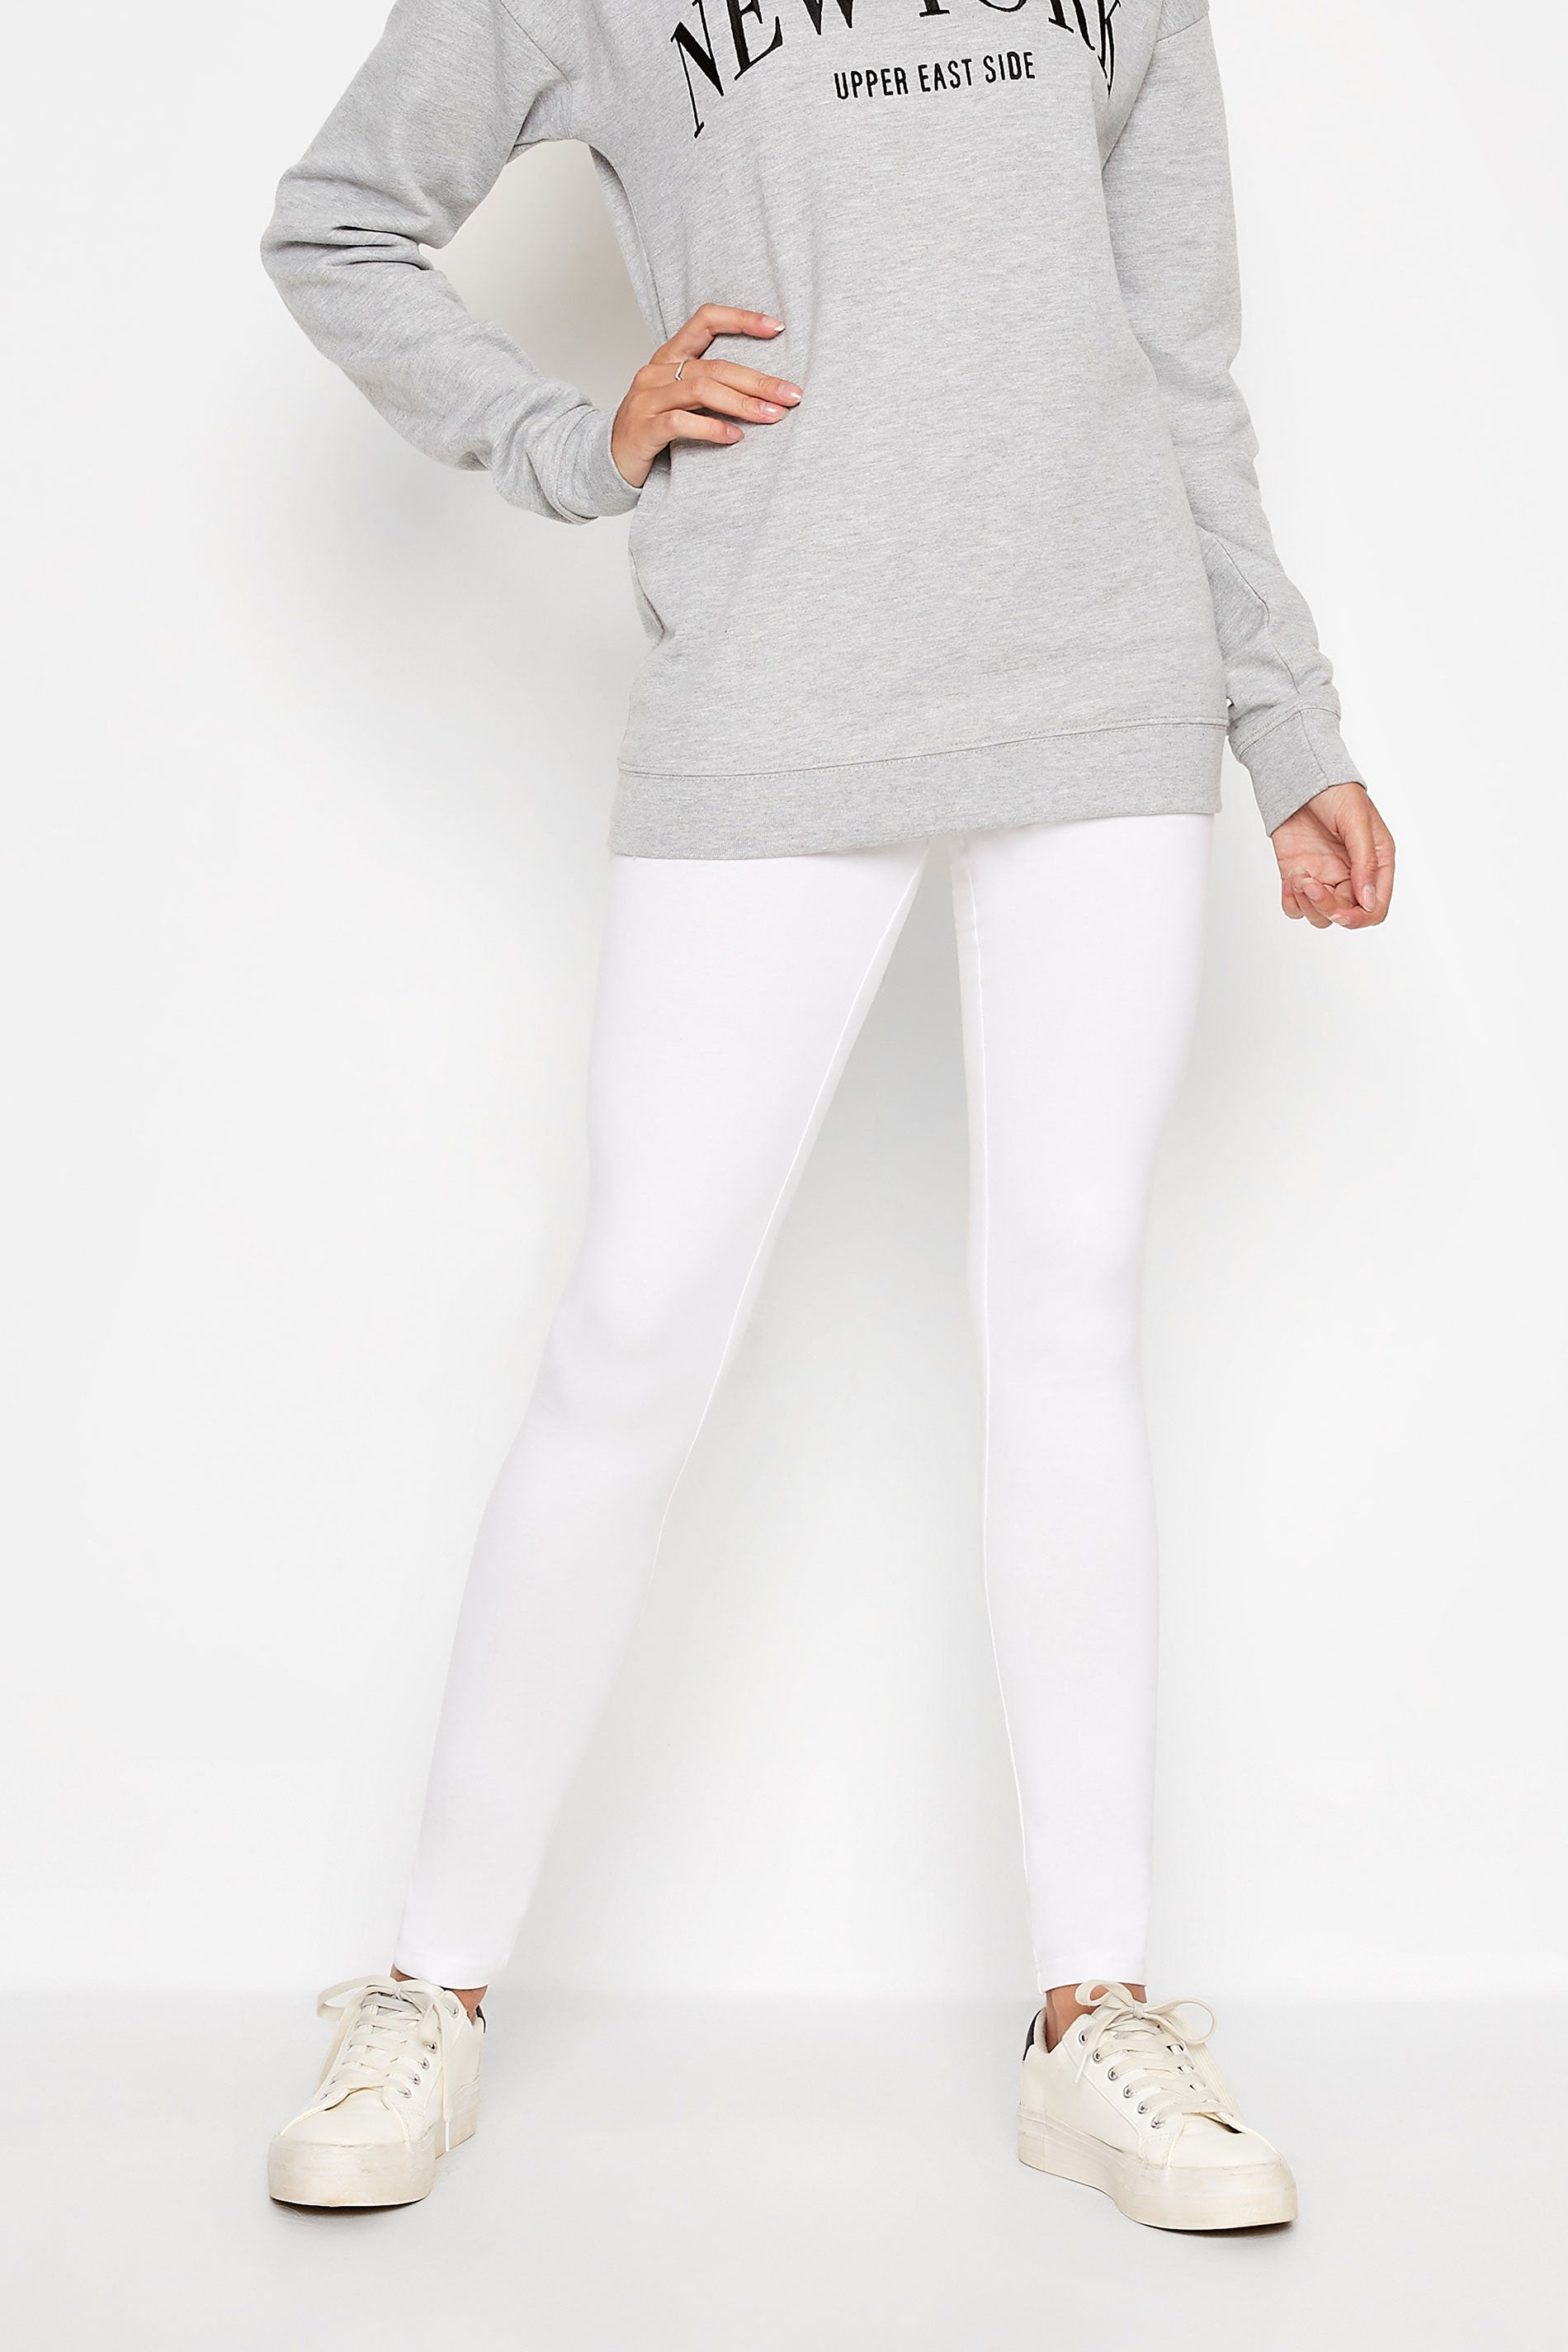 LTS MADE FOR GOOD White Organic Stretch Cotton Leggings – Search By Inseam